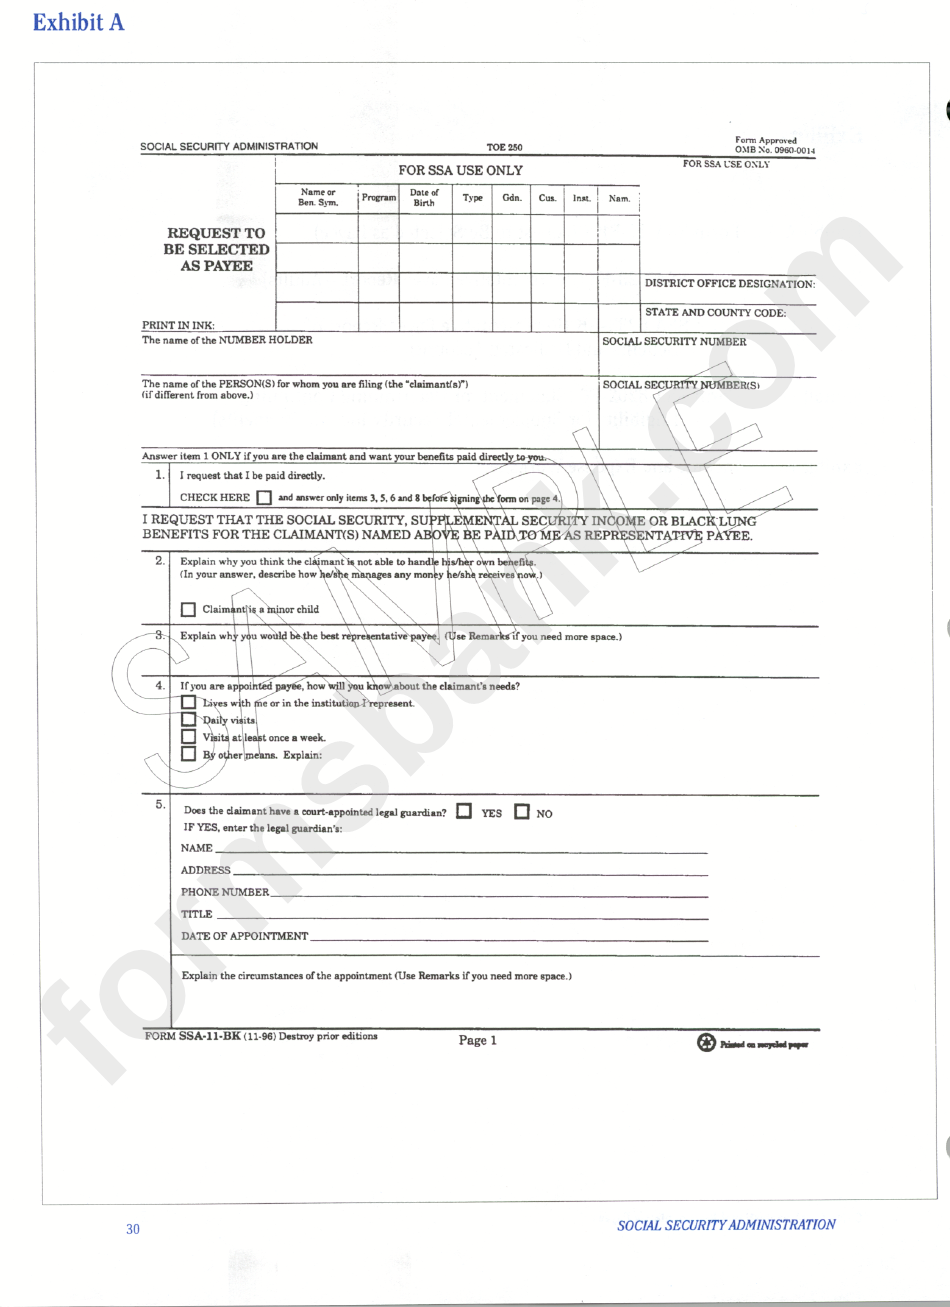 form-ssa-11-bk-request-to-be-selected-as-payee-social-security-administration-printable-pdf